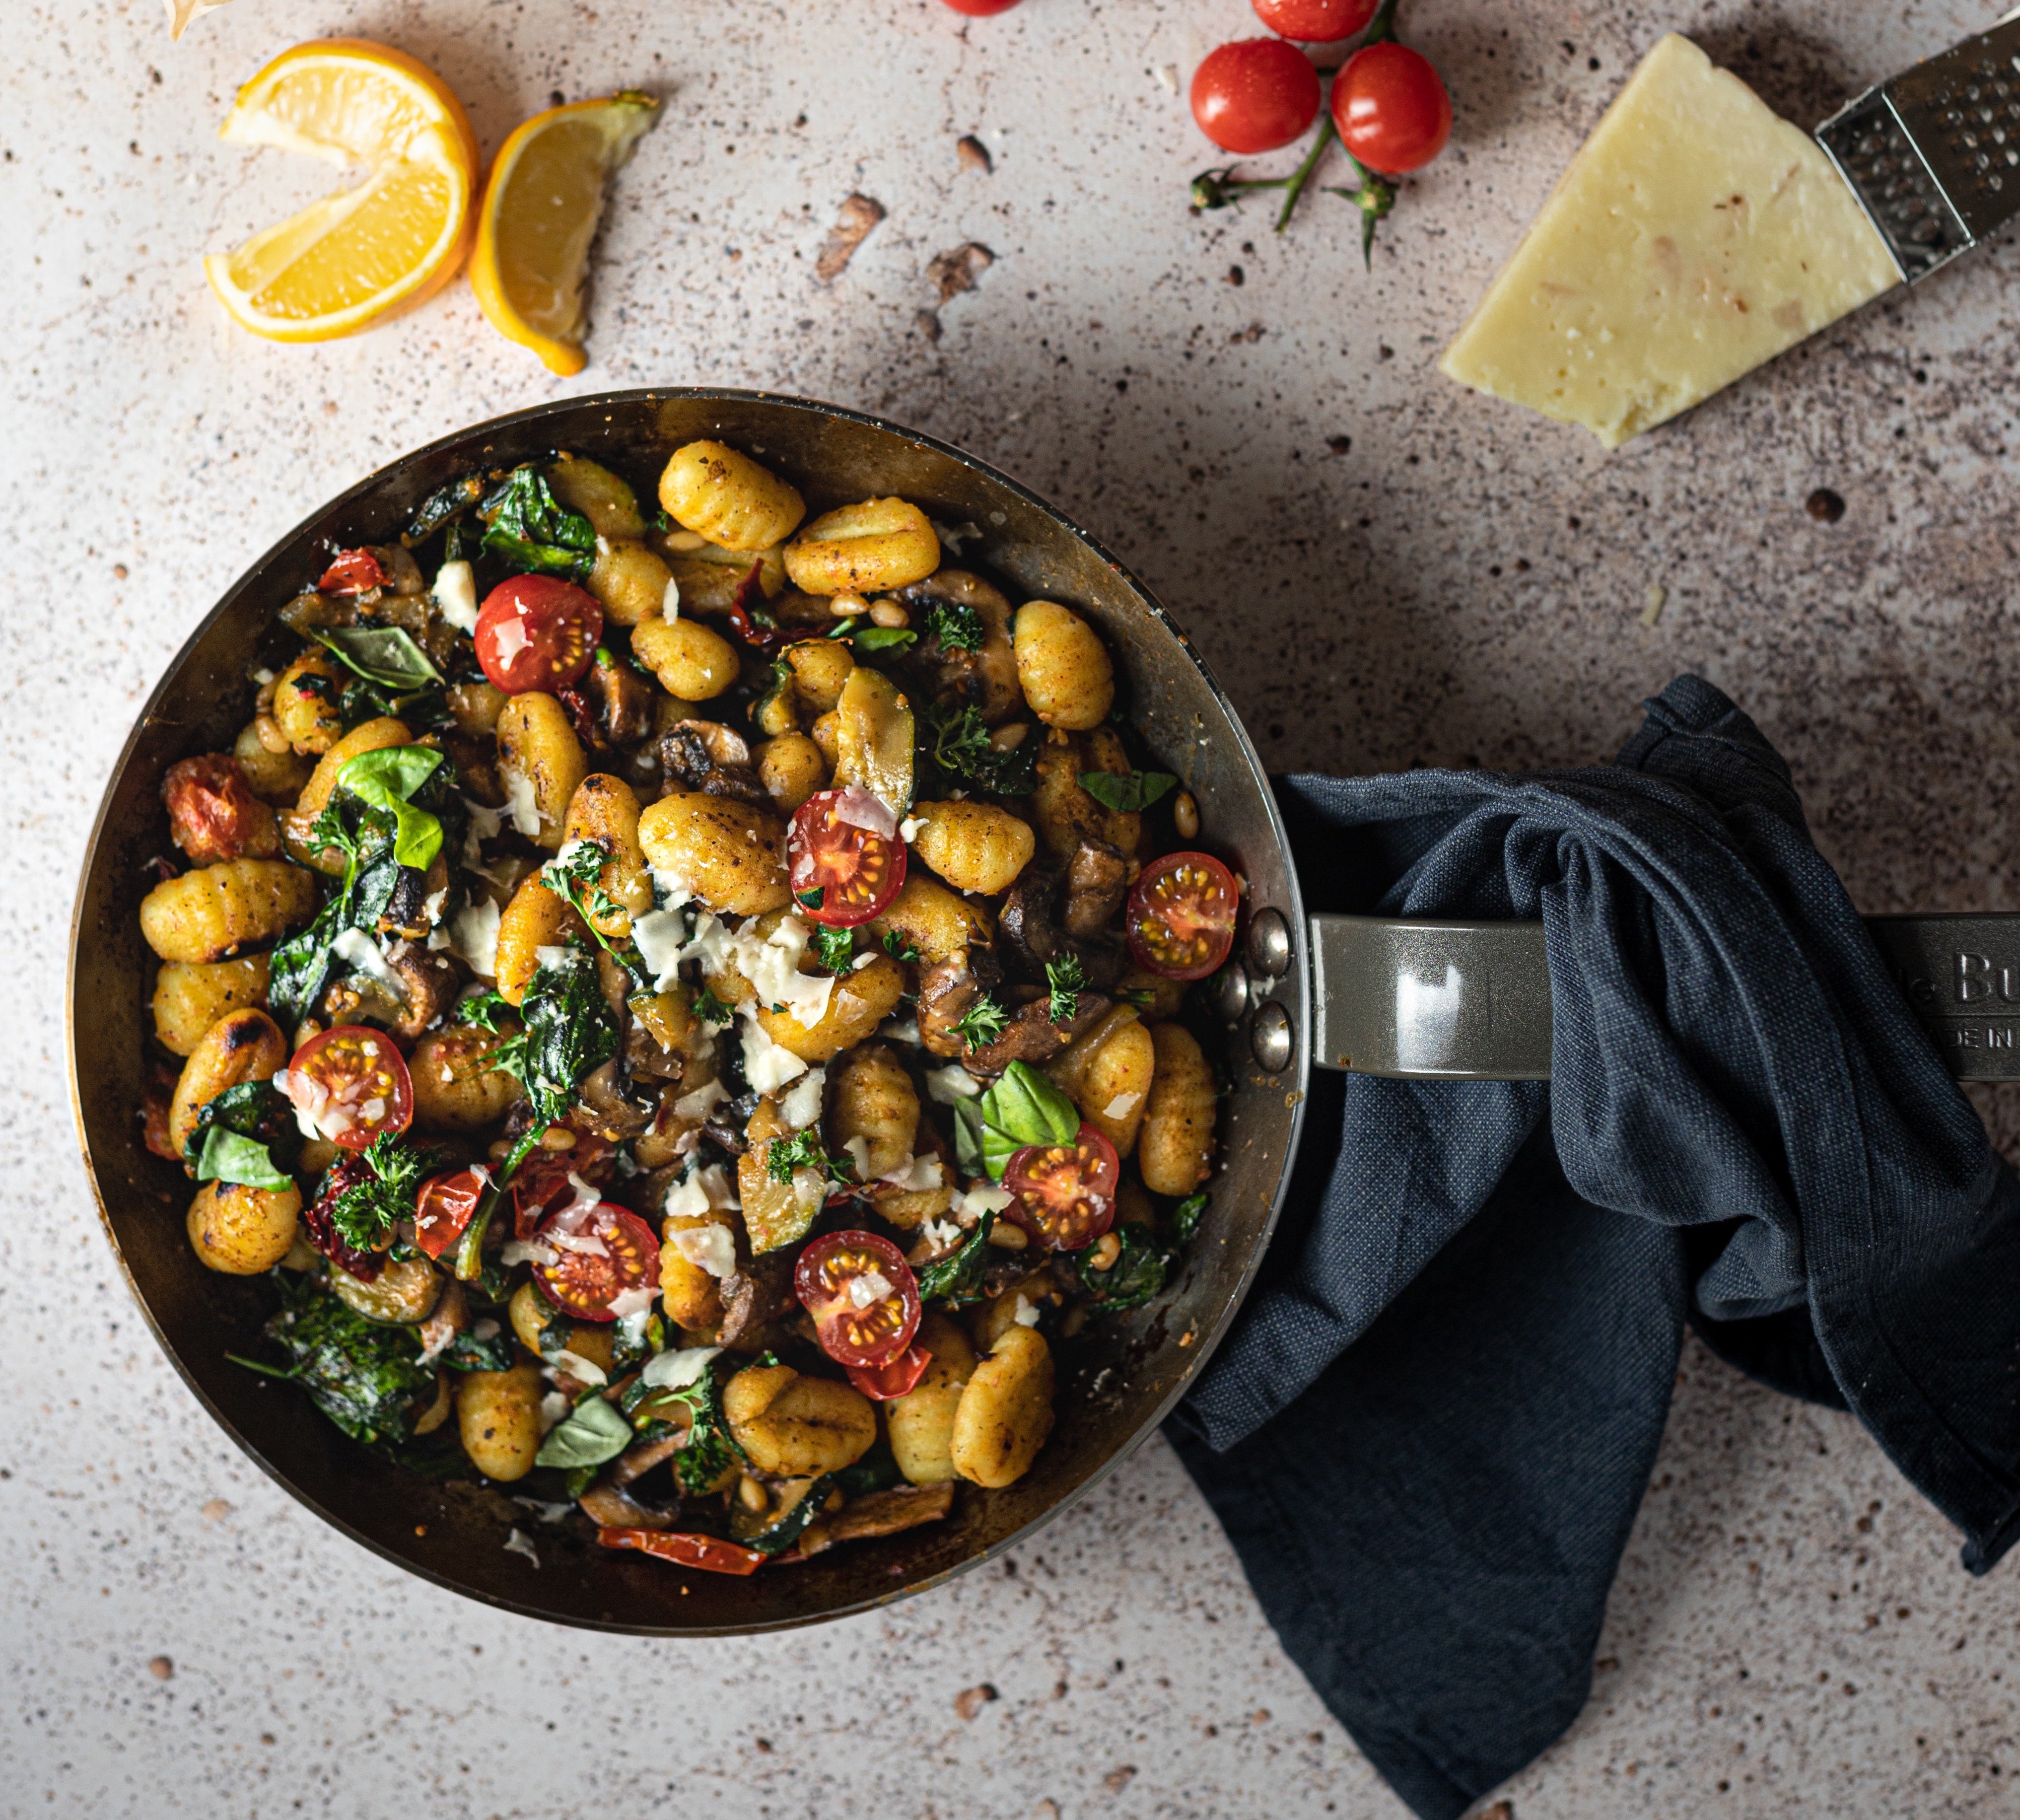 Italian Spicy Sausage and Kale Gnocchi